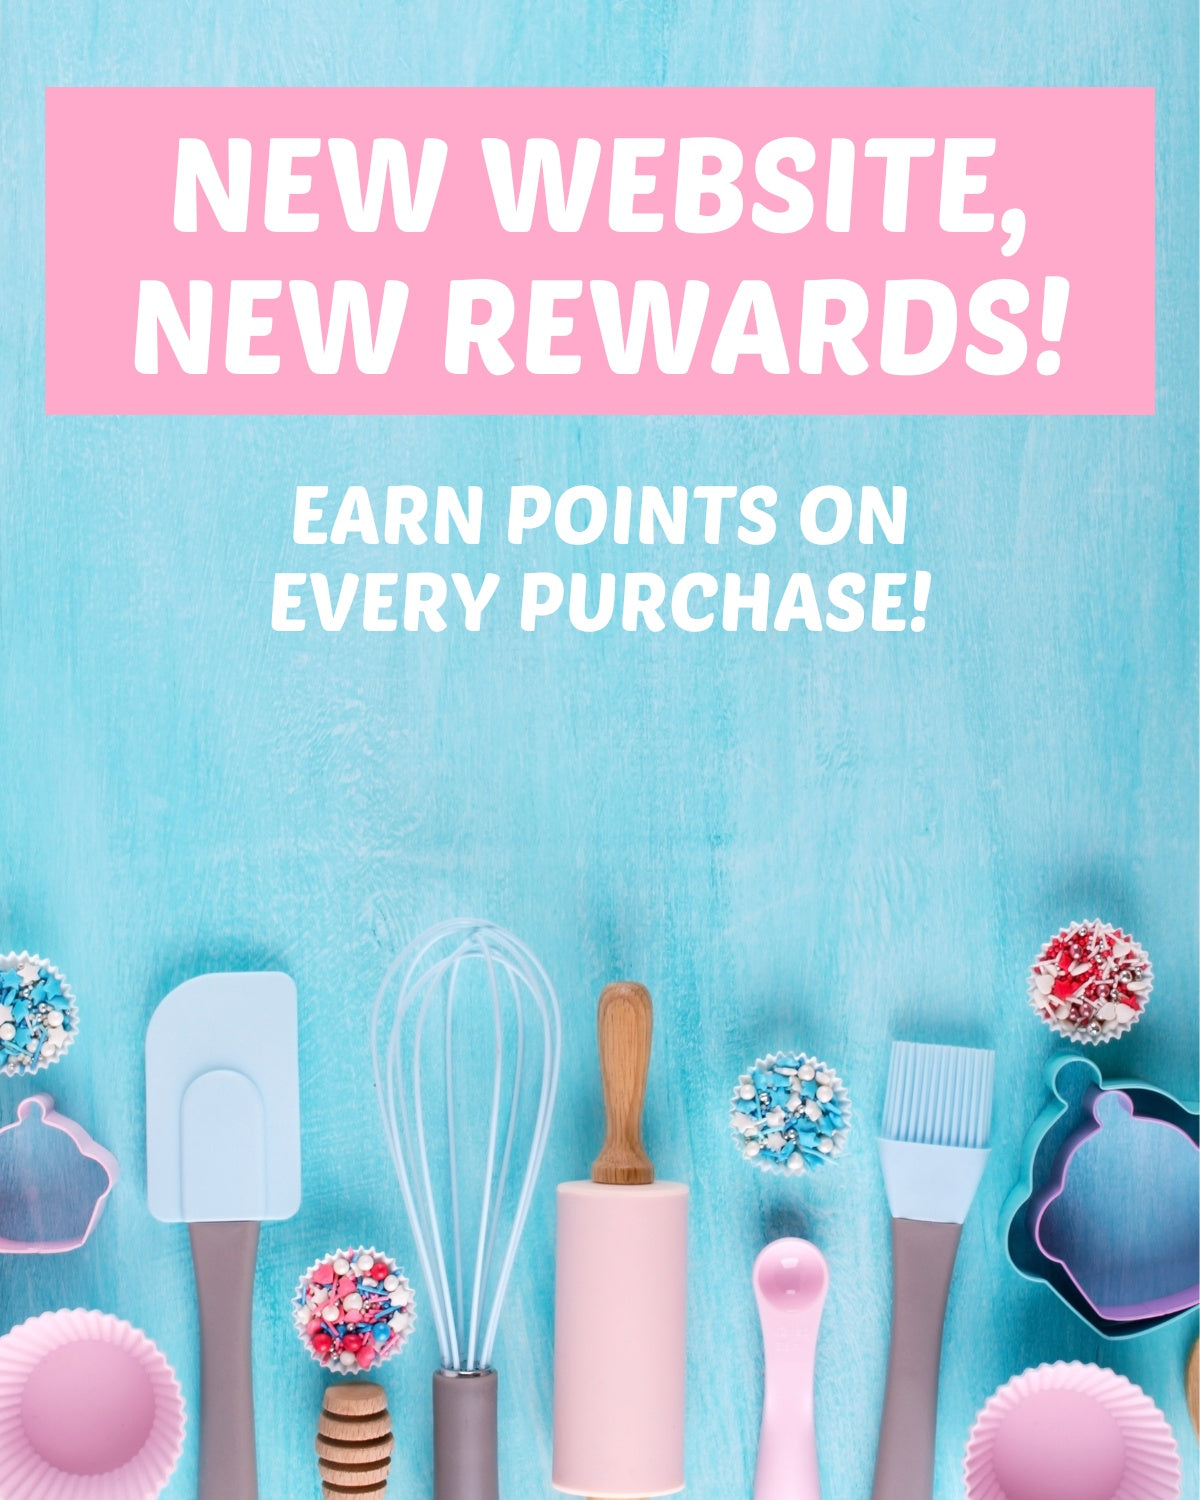 Baking supplies promotions